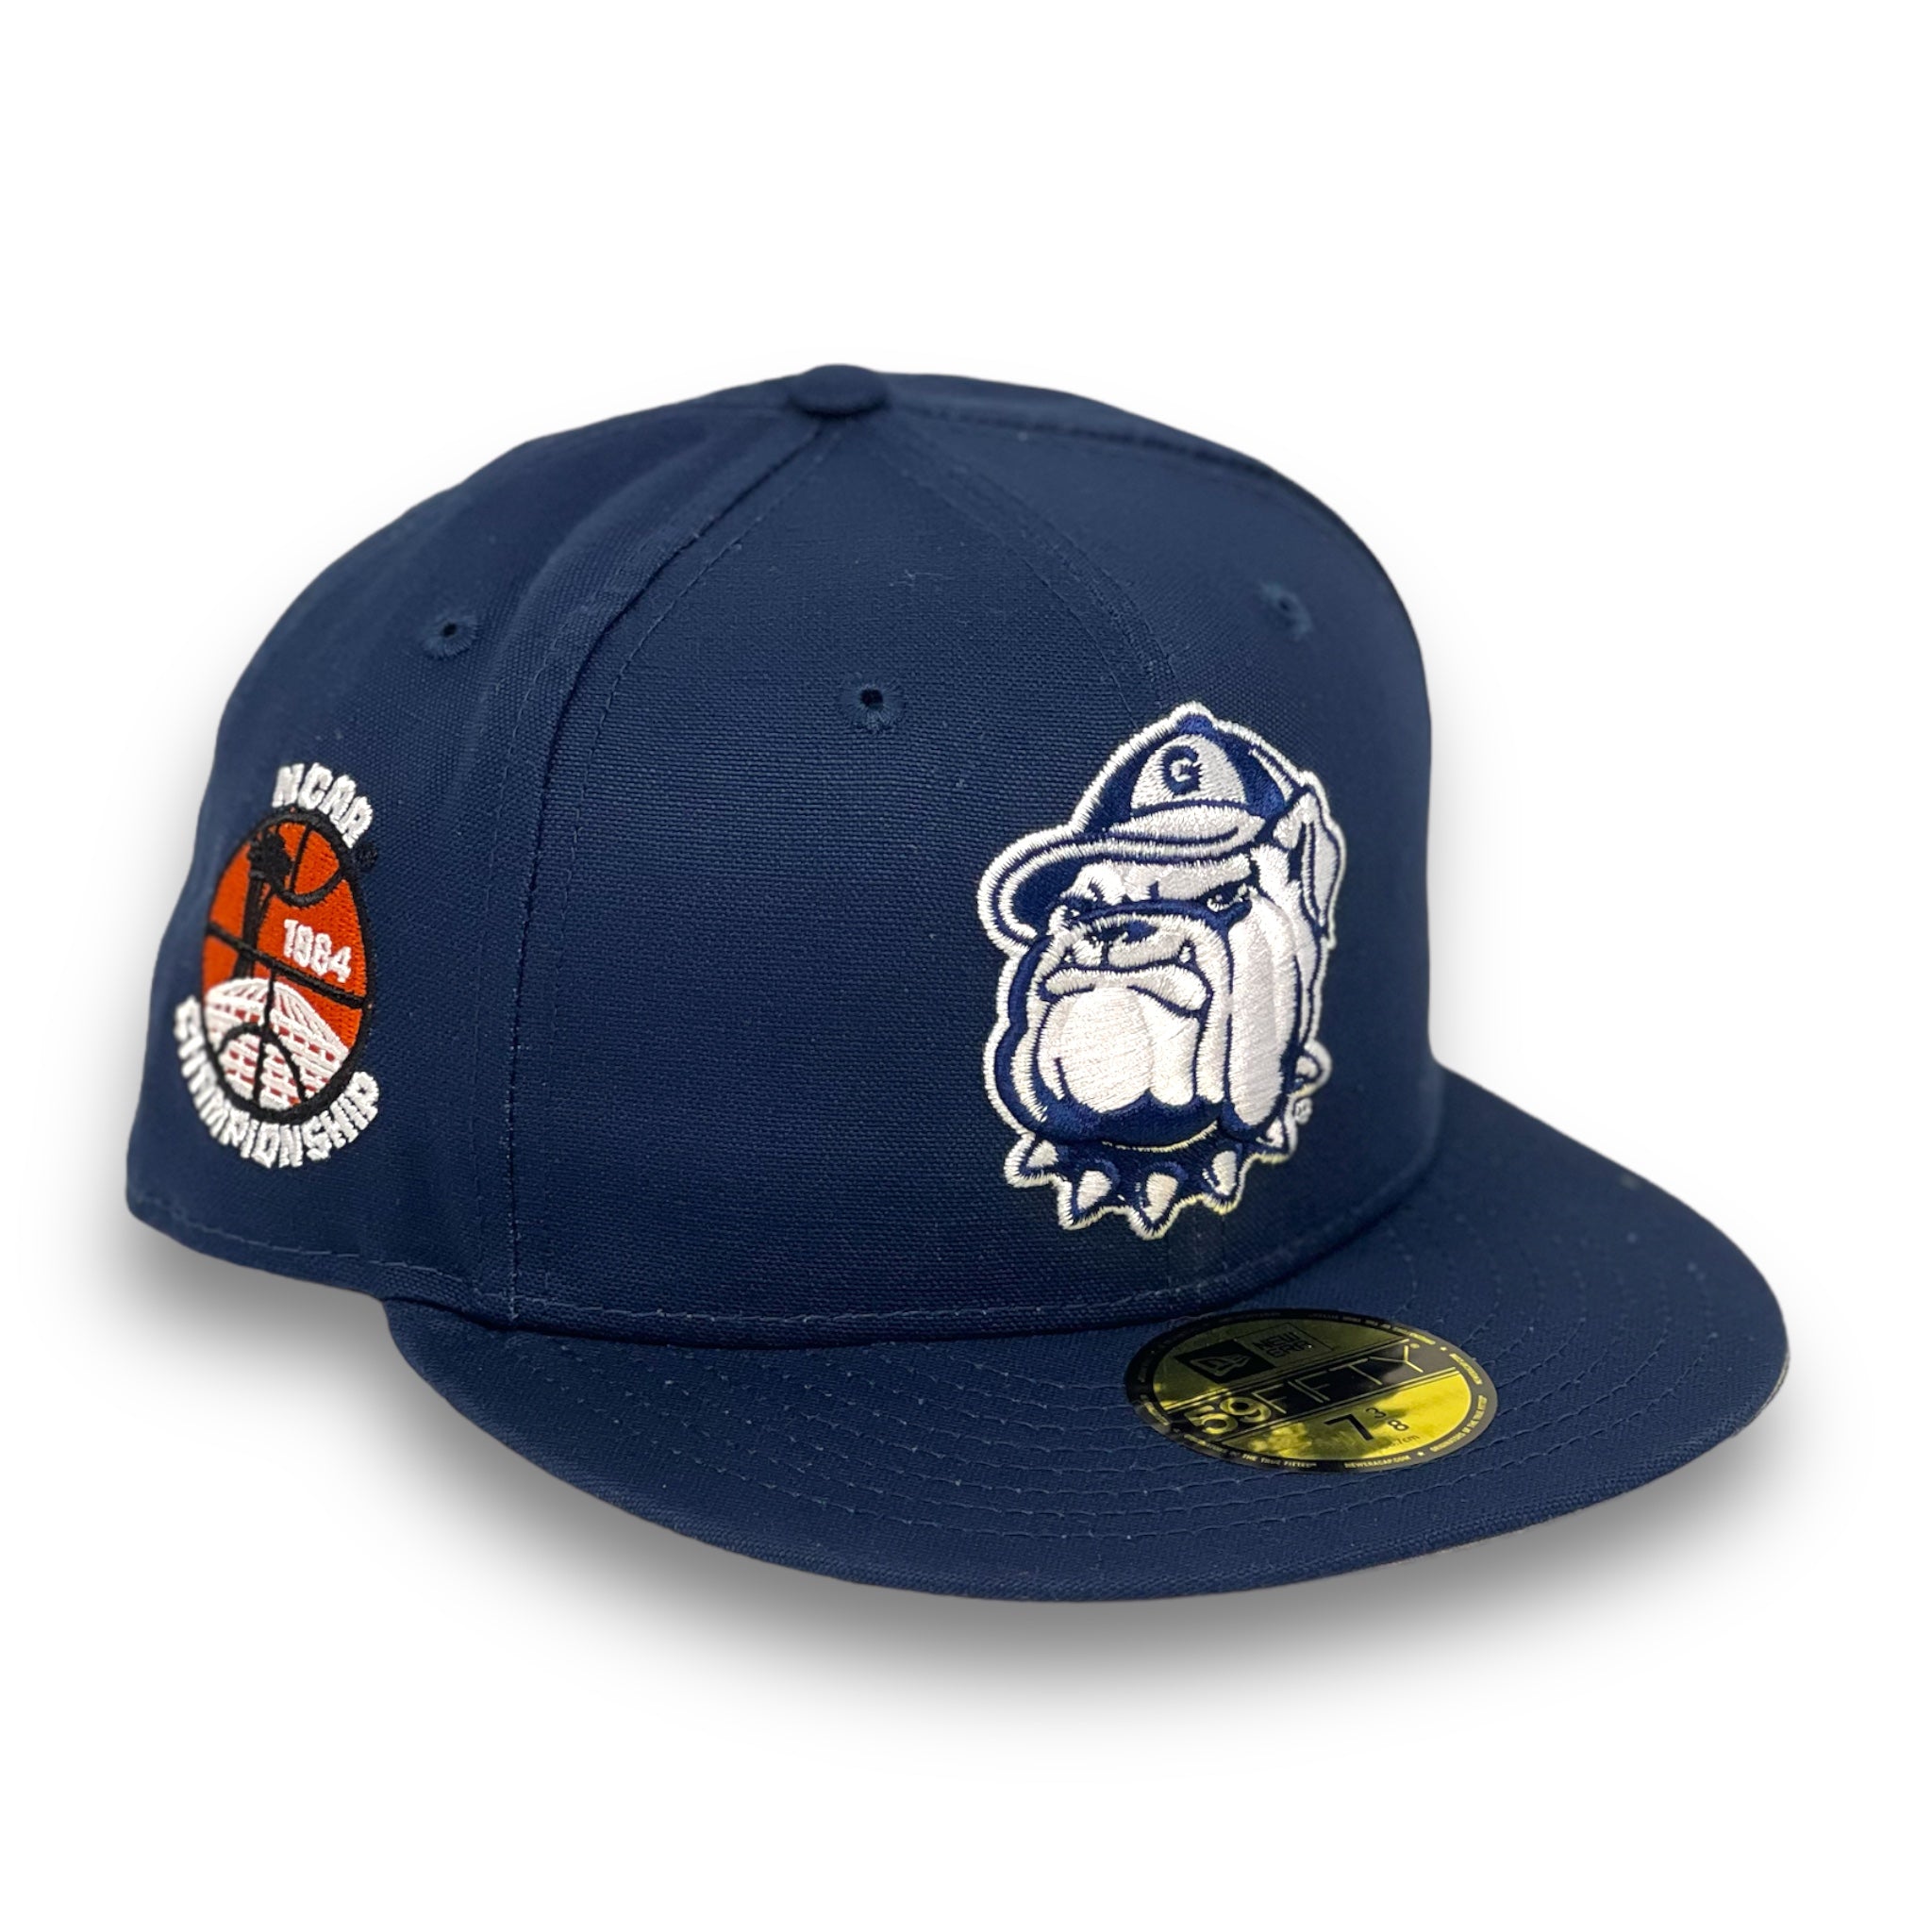 GEORGETOWN HOYAS (NAVY) (1984 CHAMPIONSHIP) NEW ERA 59FIFTY FITTED